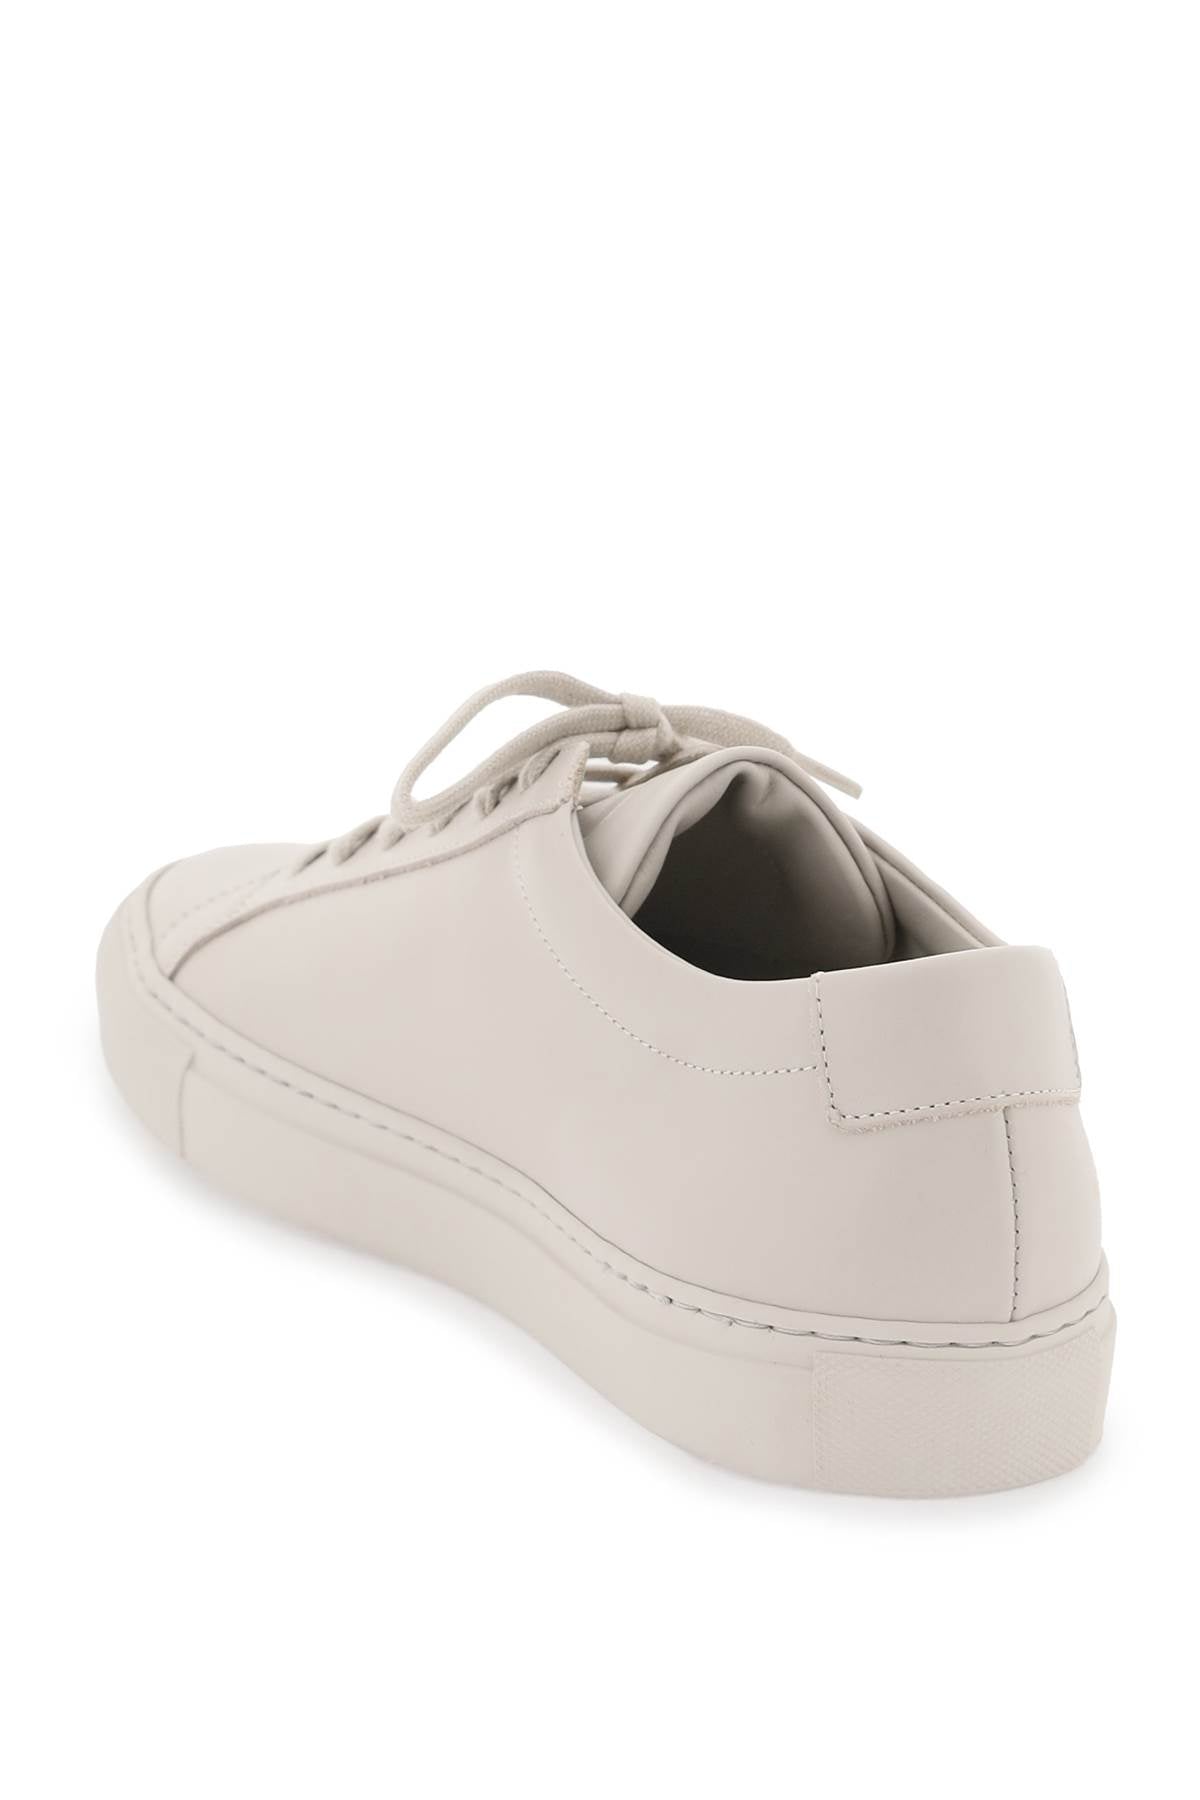 COMMON PROJECTS Tan Leather Low Top Sneakers for Men